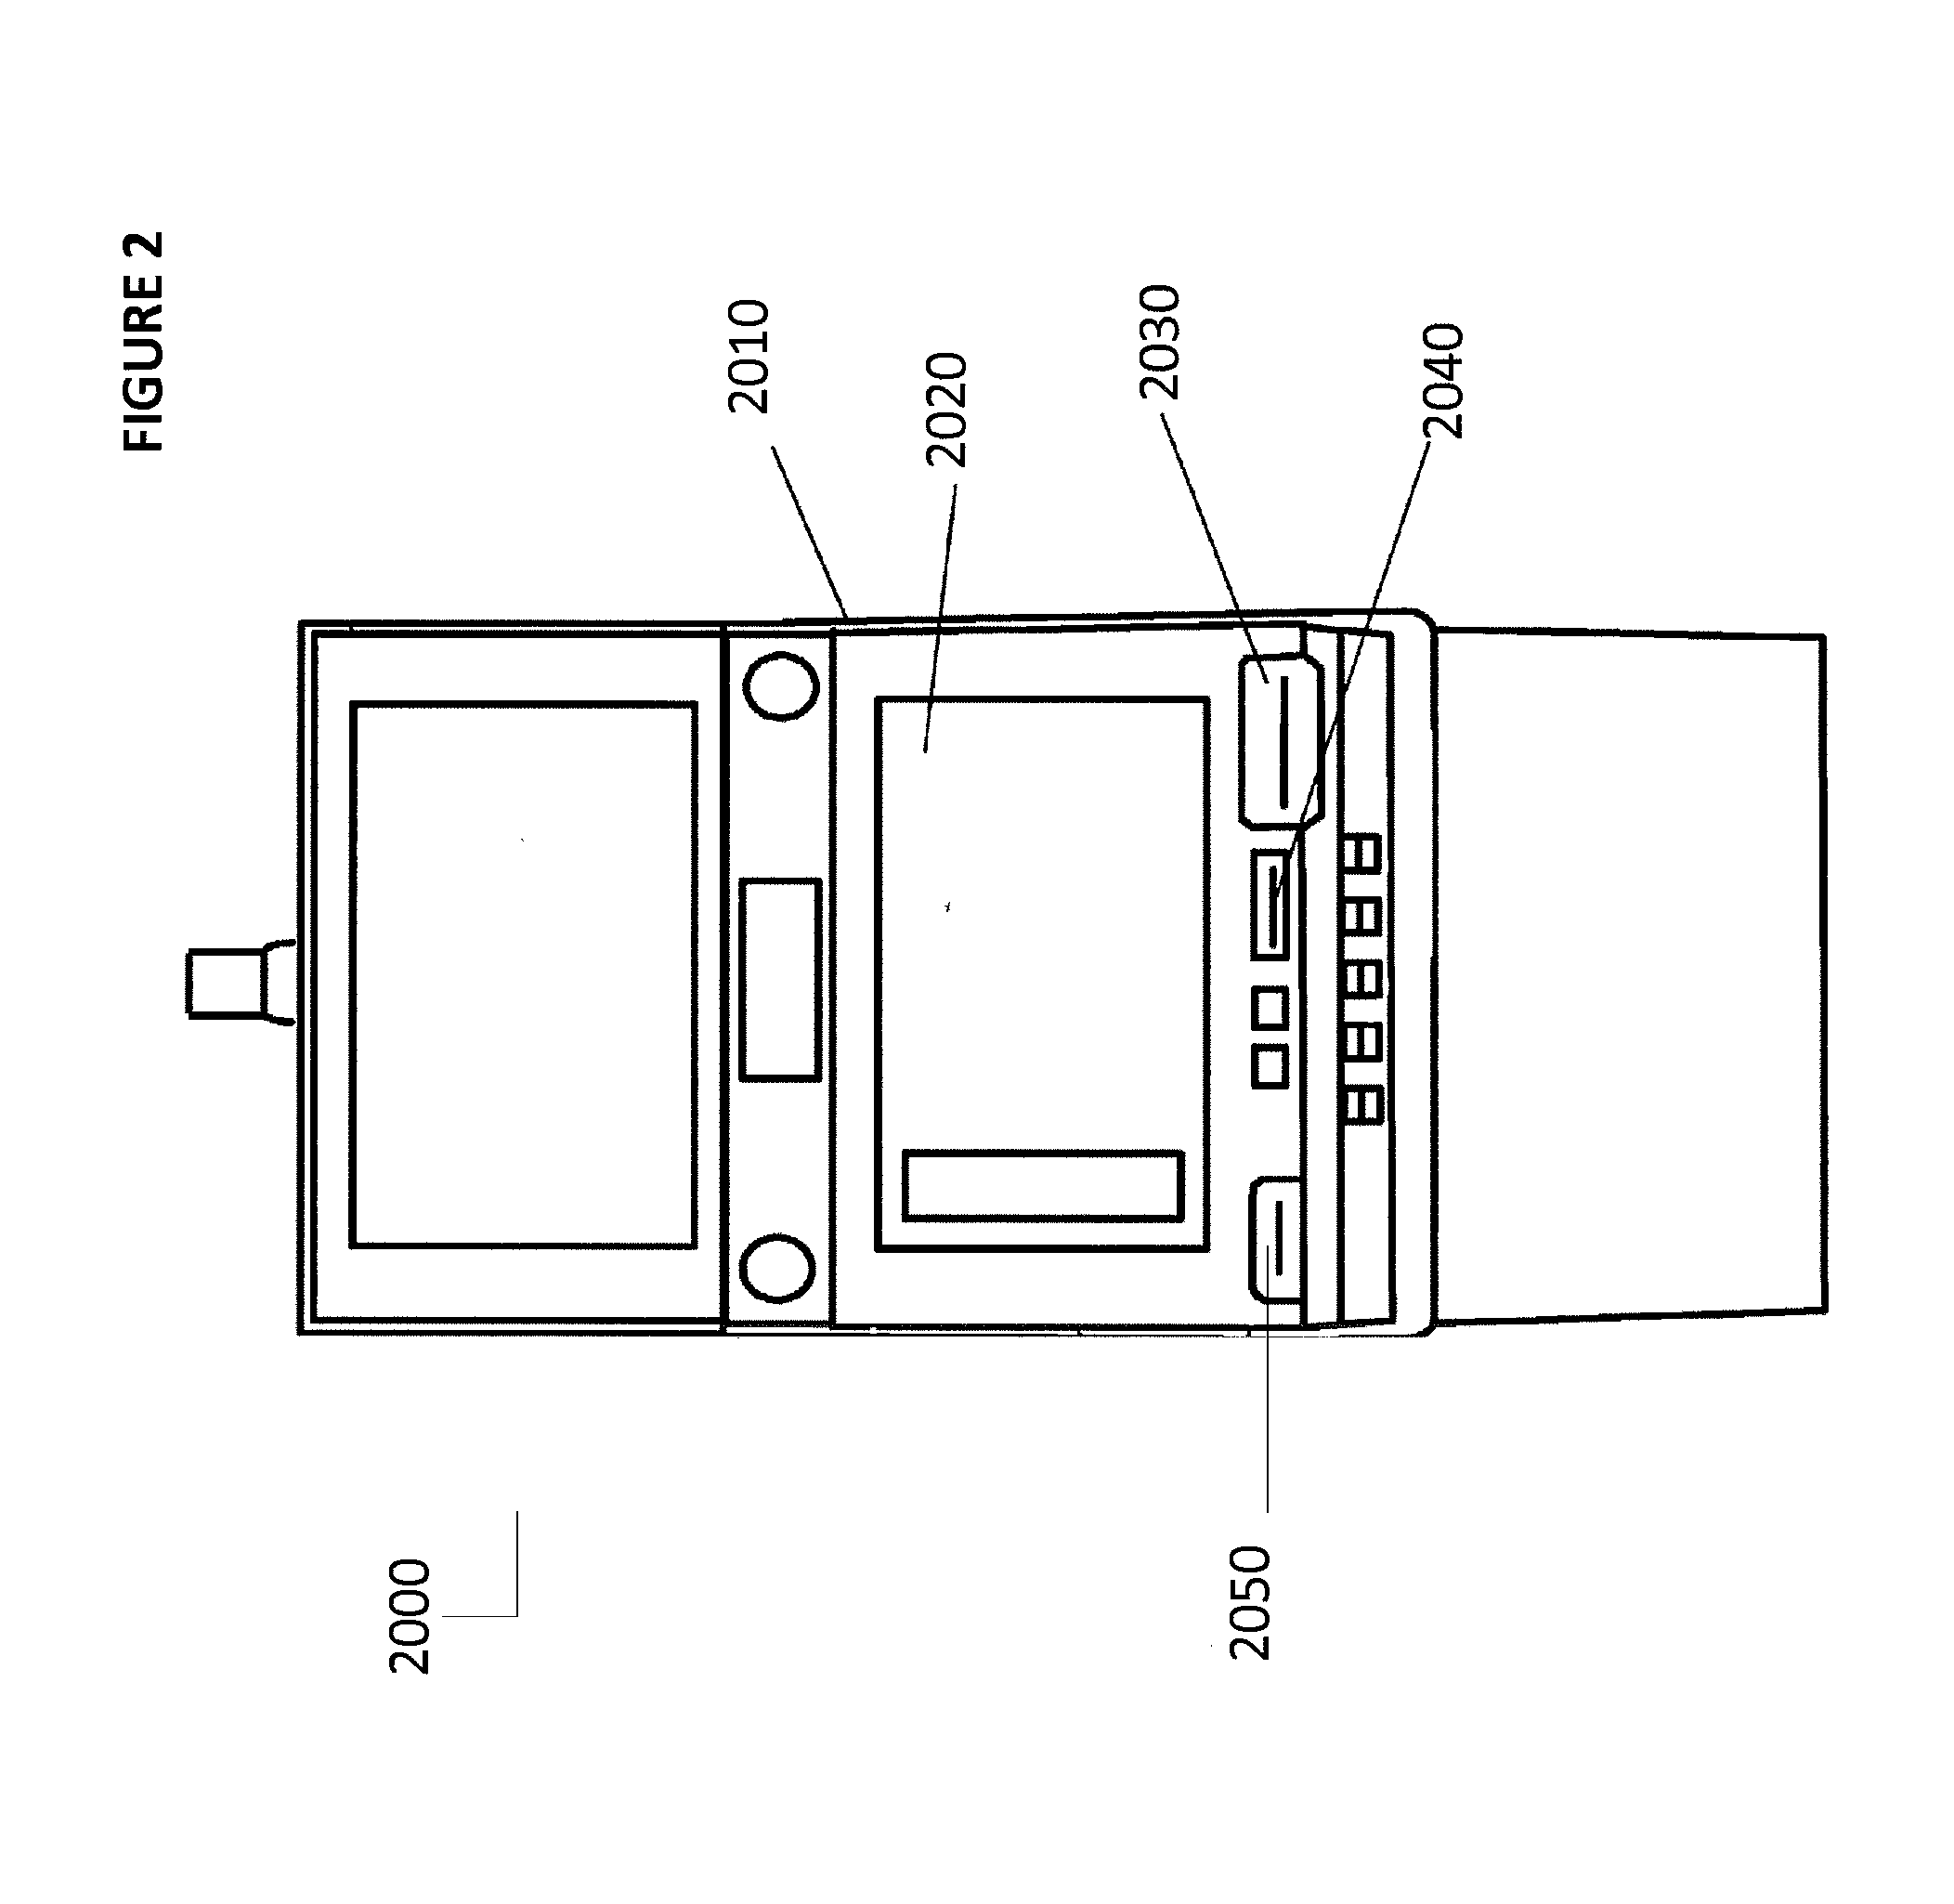 Gaming system and gaming machines utilizing cash tickets having a feature trigger